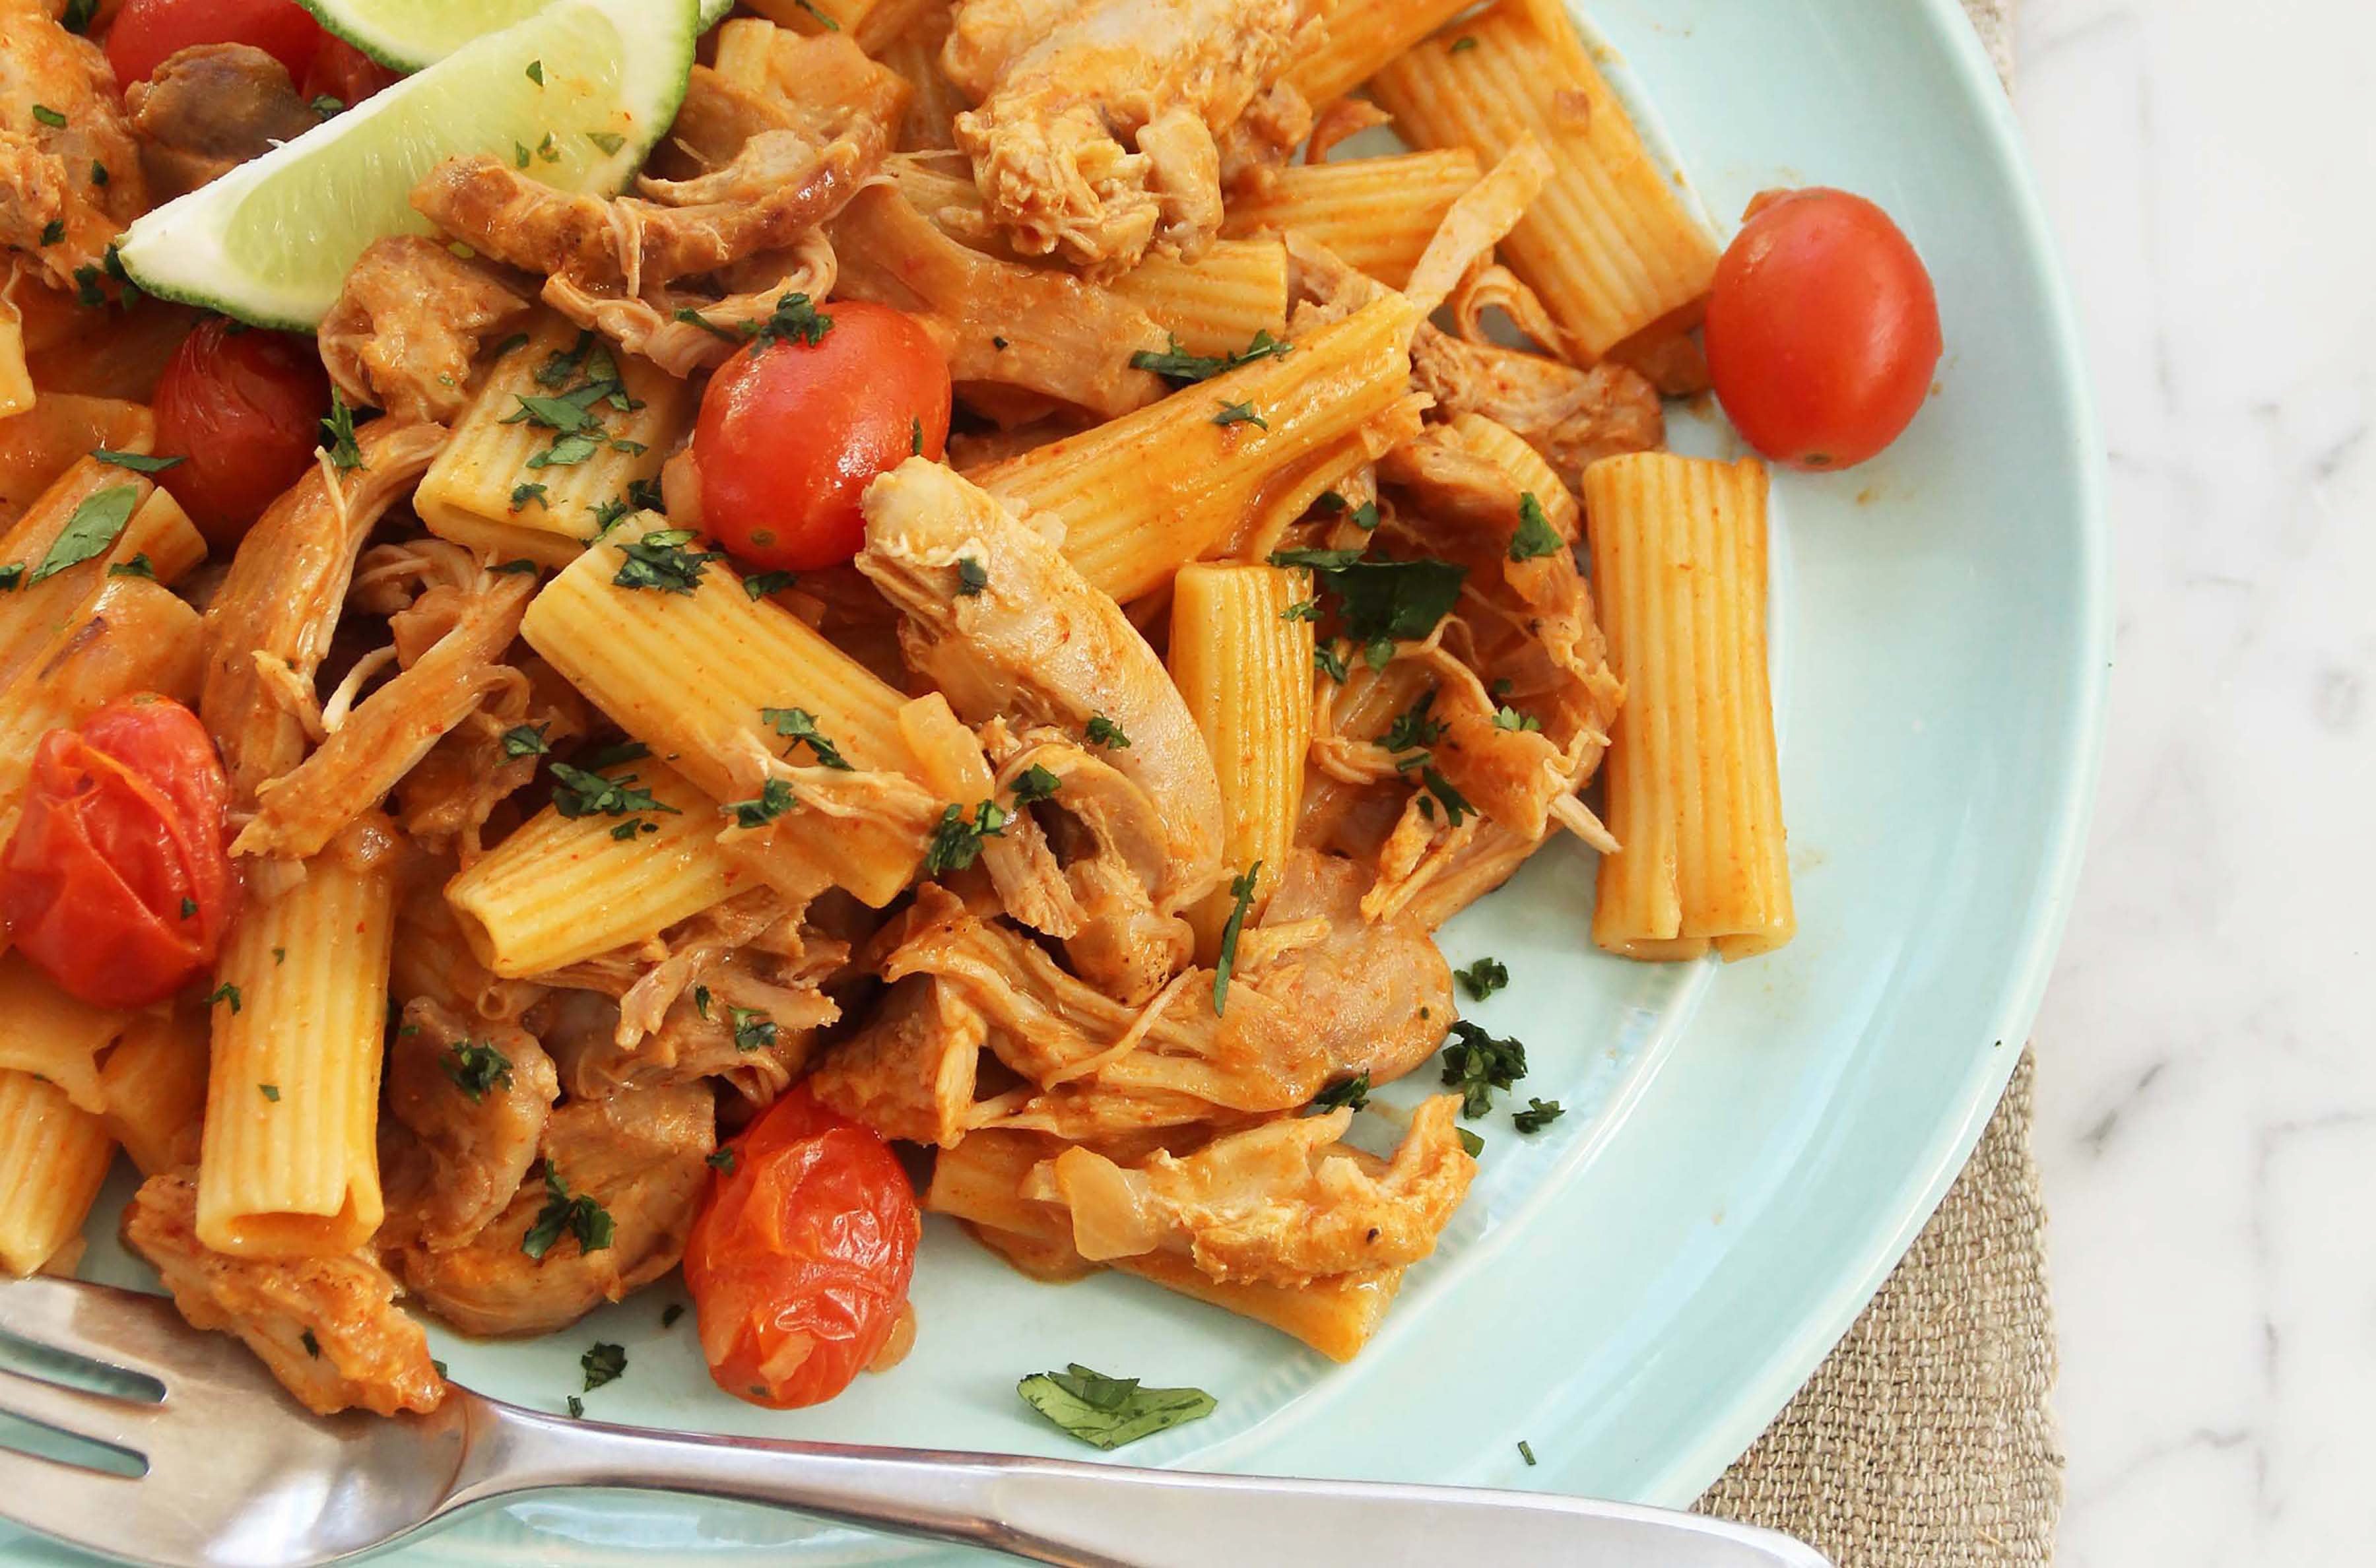 An easy weeknight pasta dinner made with shredded chicken.